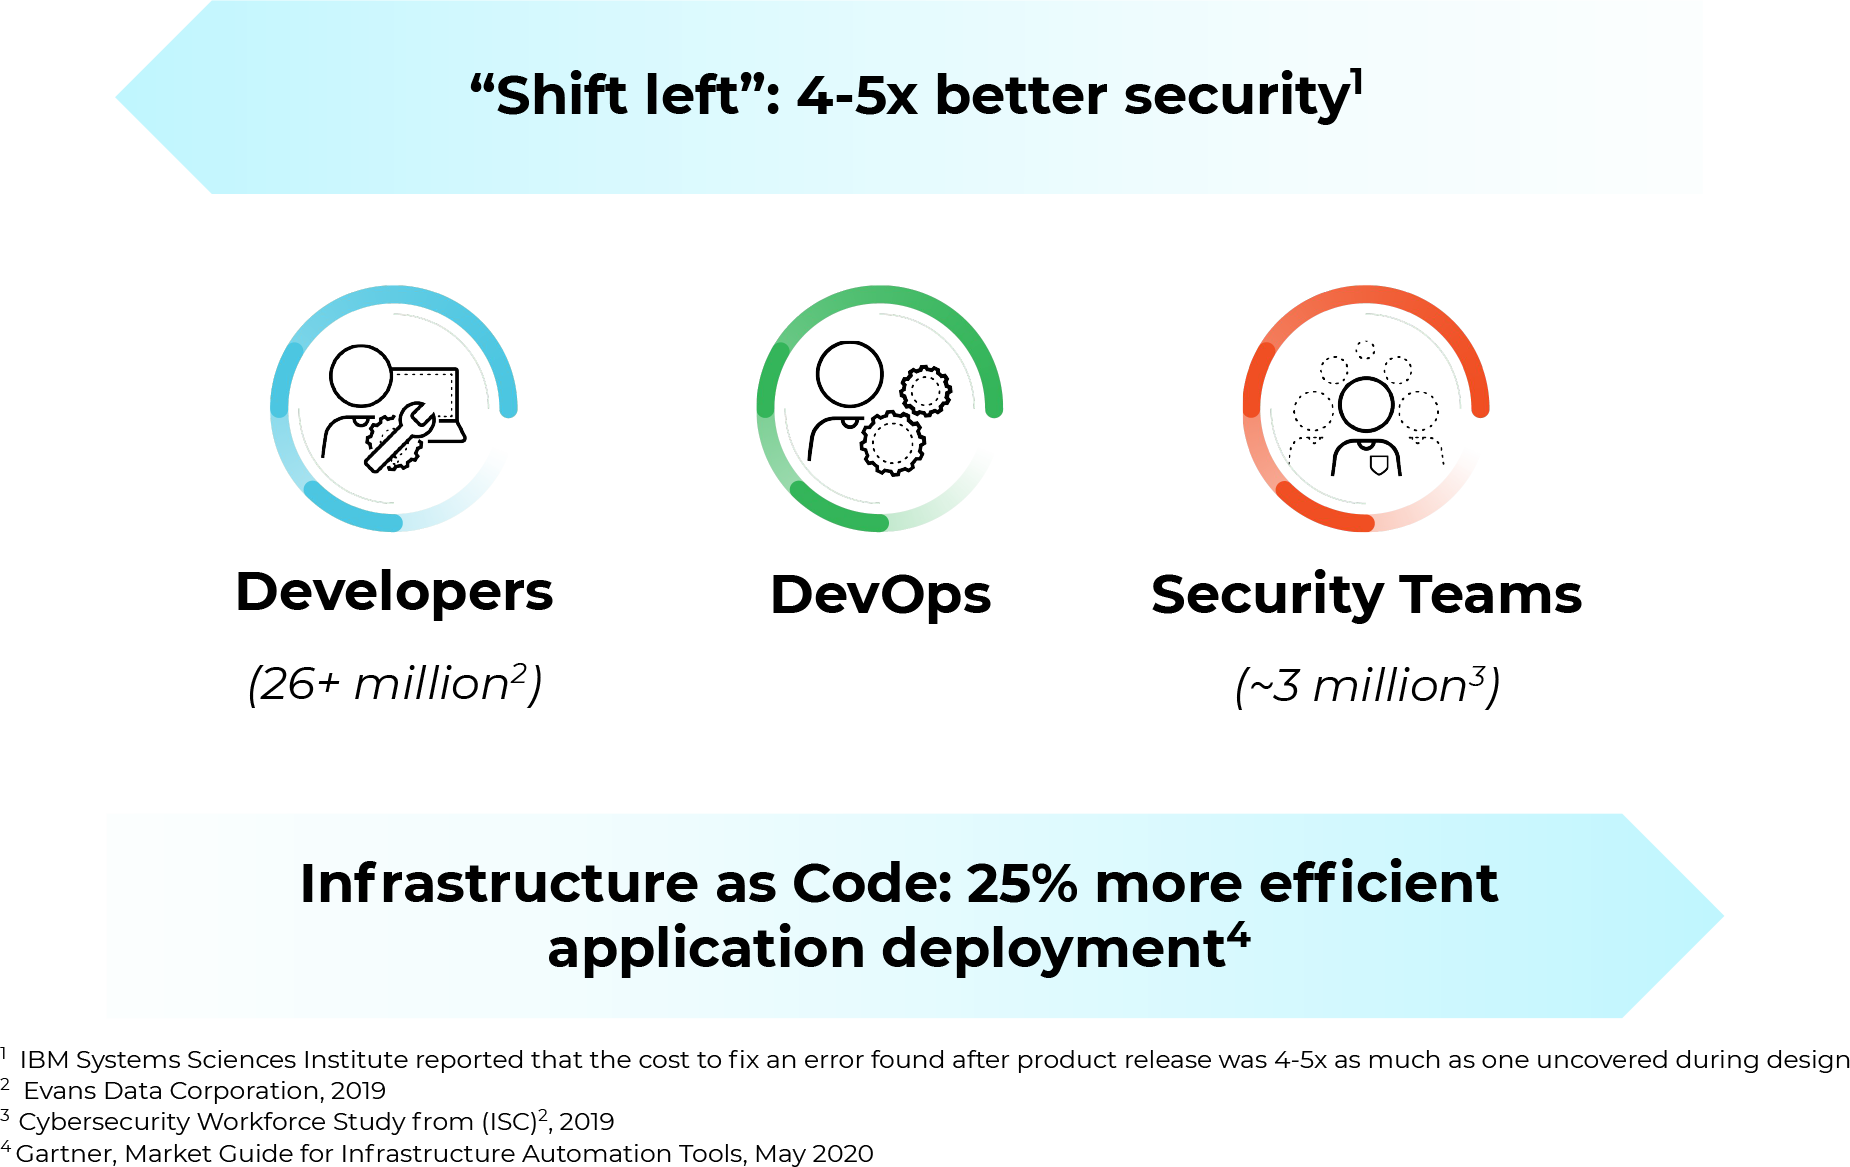 "Shift left": 4-5x better security; Developers (26+ million), DevOps, Security Teams (about three million); Infrastructure as Code: 25% more efficient application deployment. 